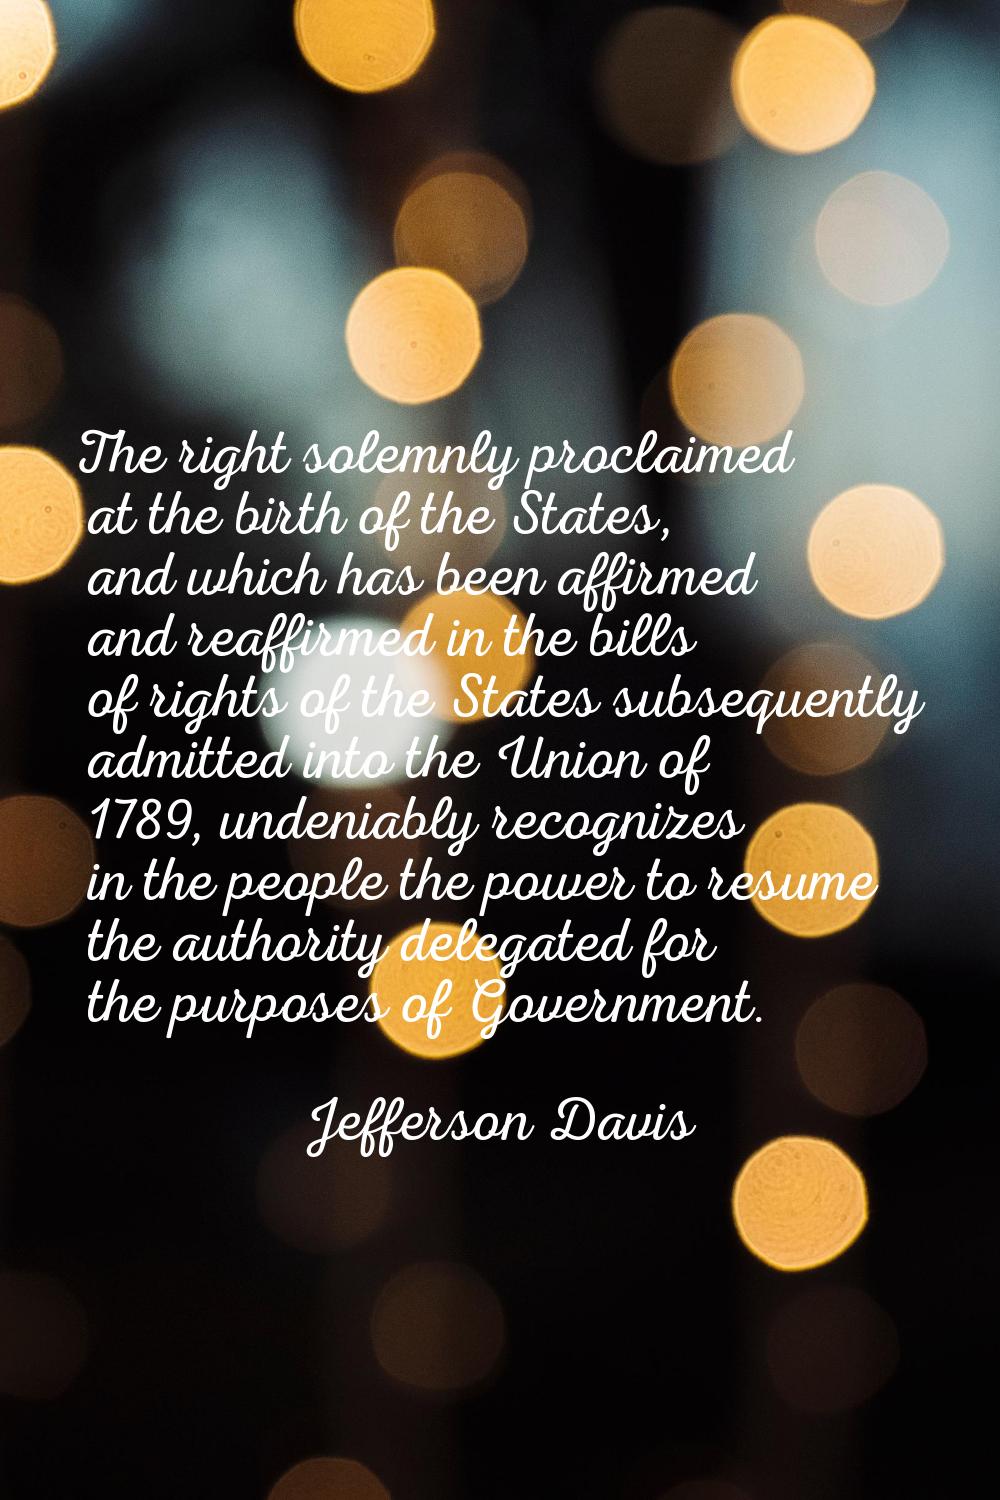 The right solemnly proclaimed at the birth of the States, and which has been affirmed and reaffirme